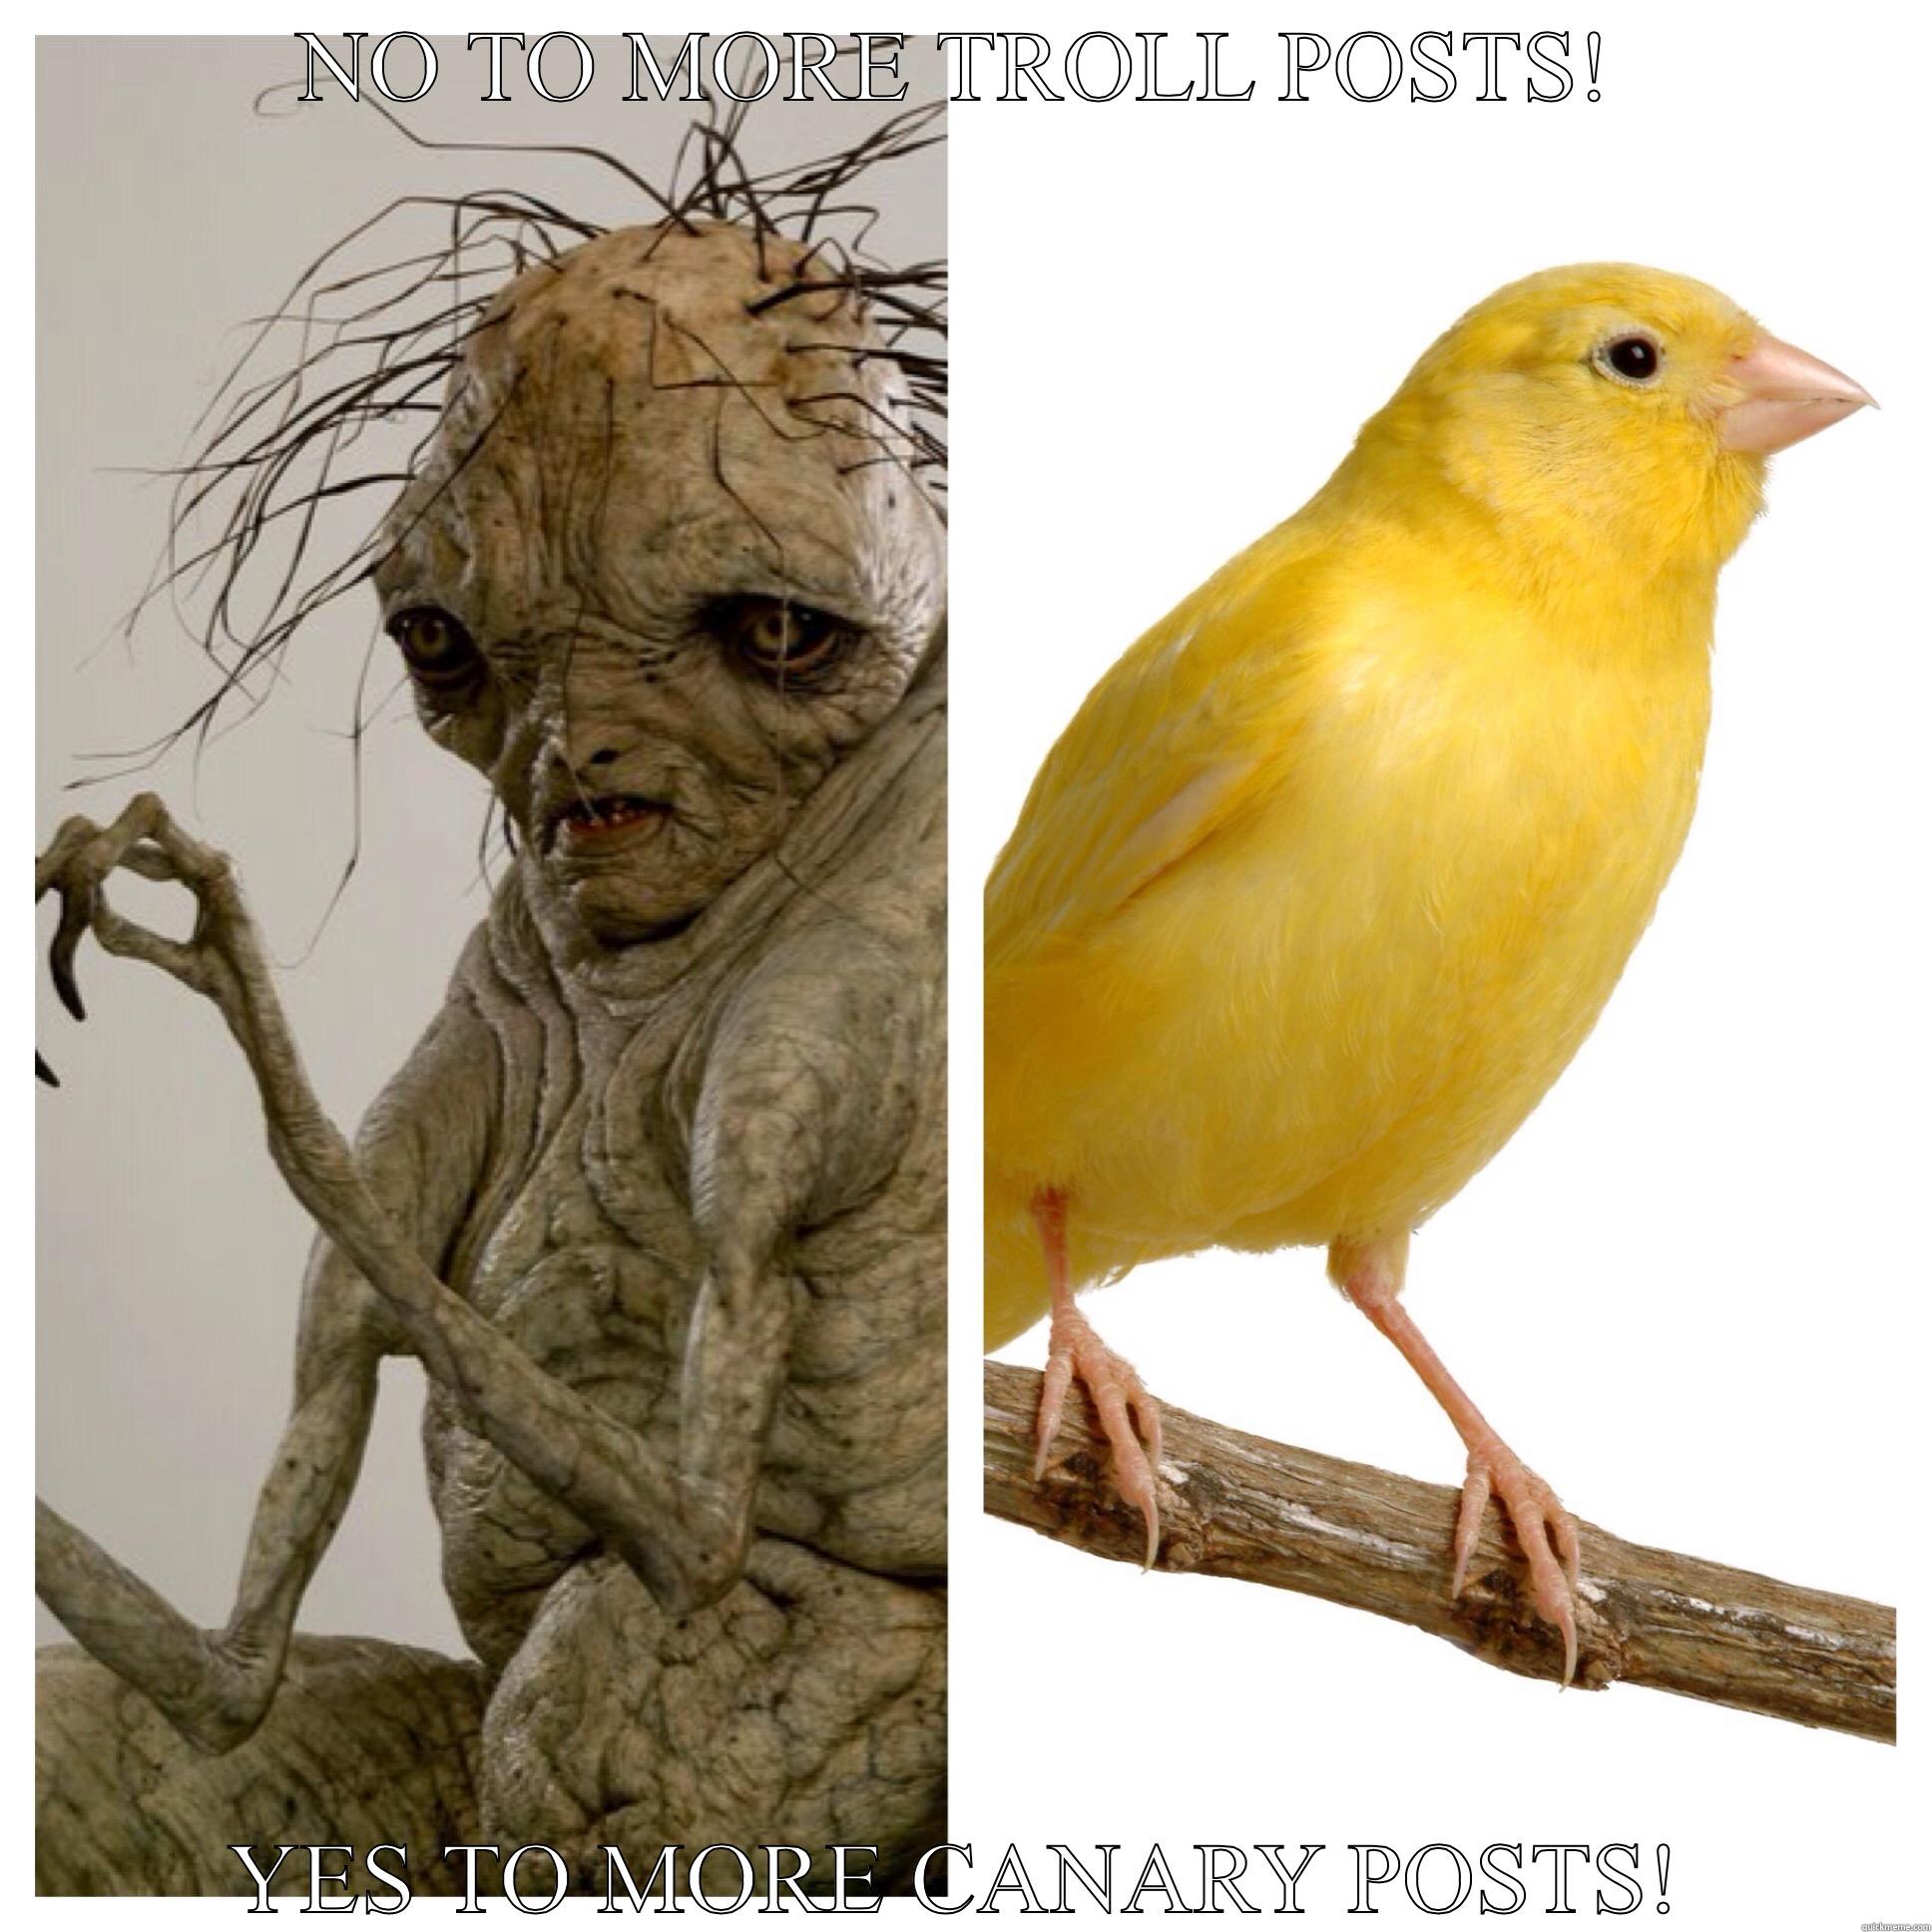 No more Trolls; More Canaries - NO TO MORE TROLL POSTS! YES TO MORE CANARY POSTS! Misc